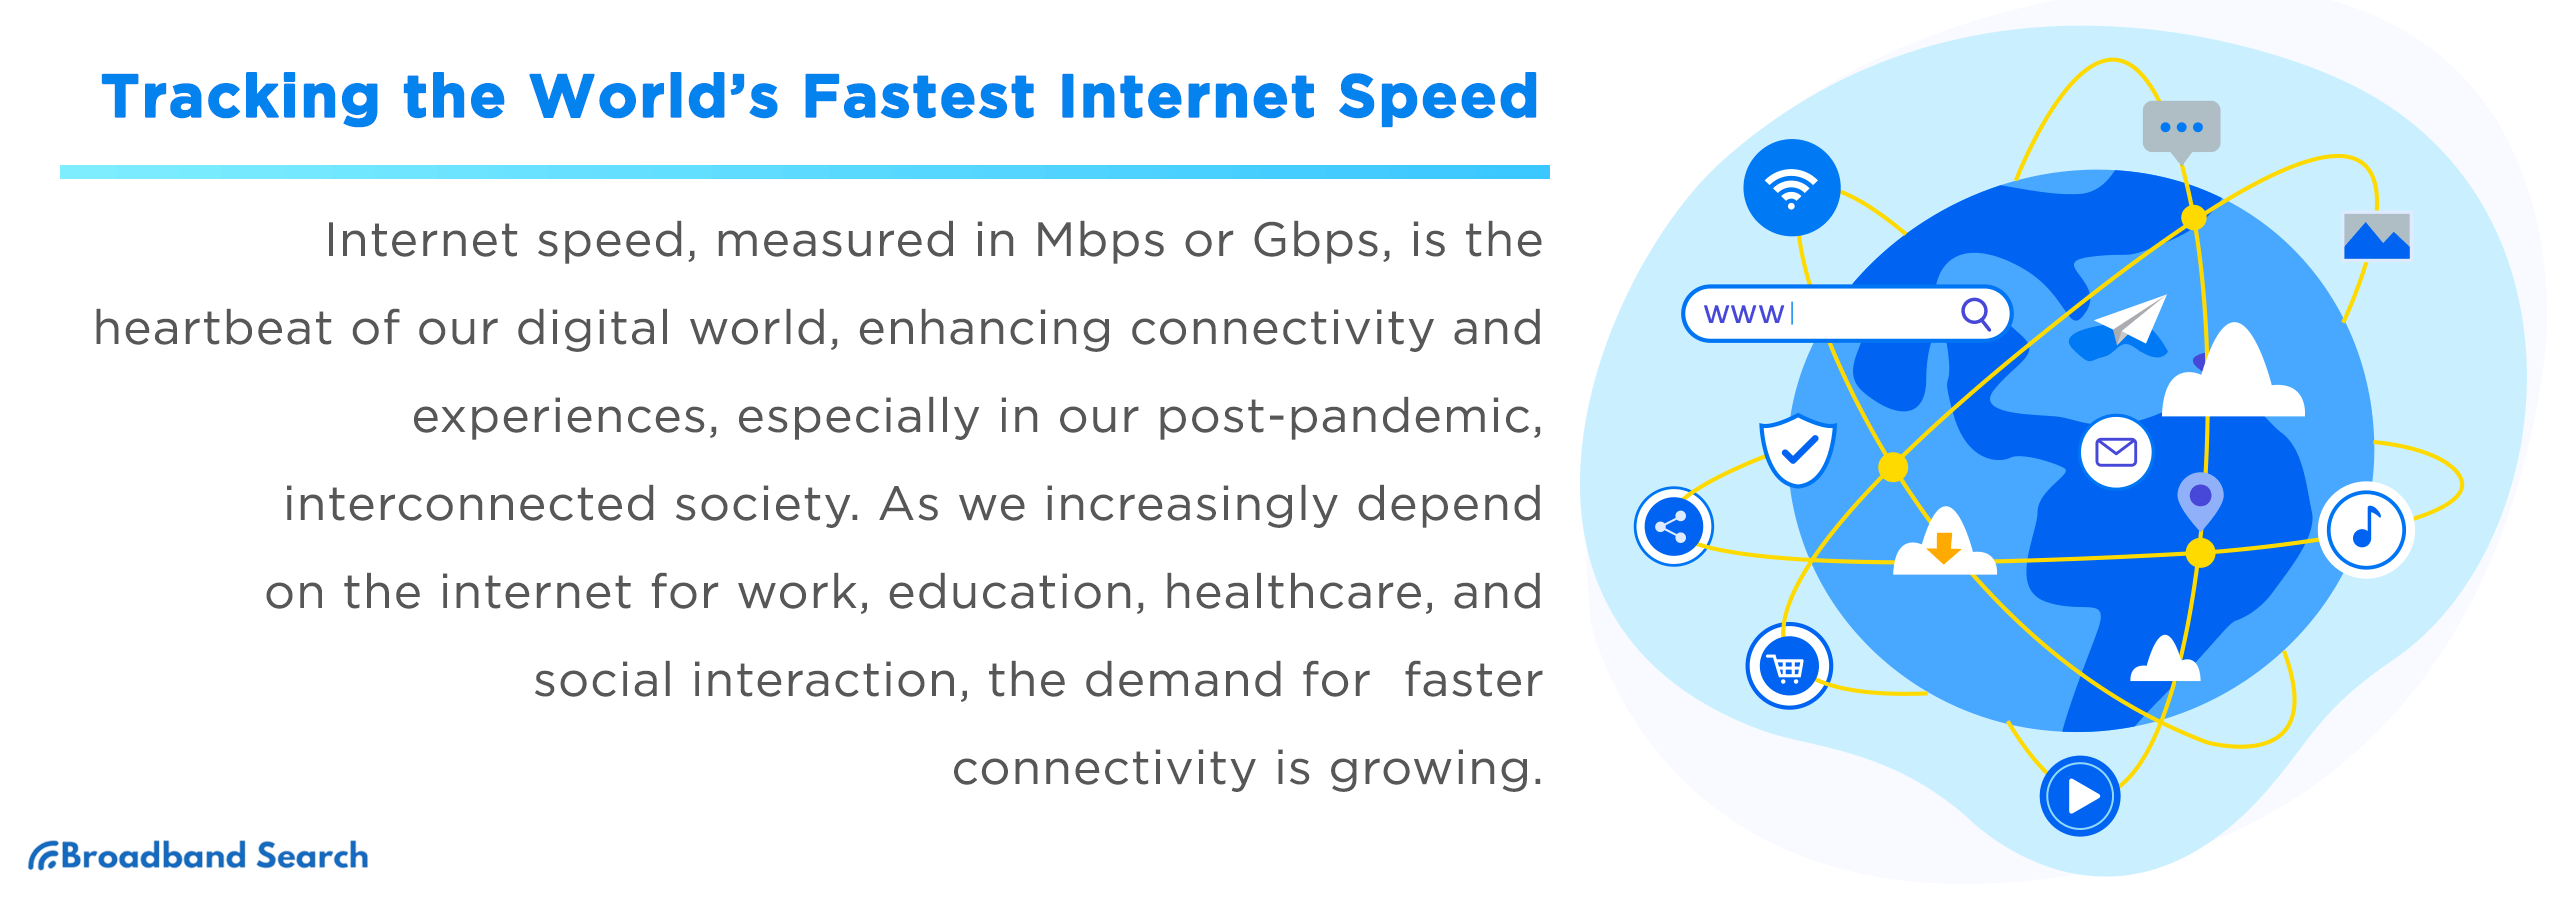 Tracking the World’s Fastest Internet Speed